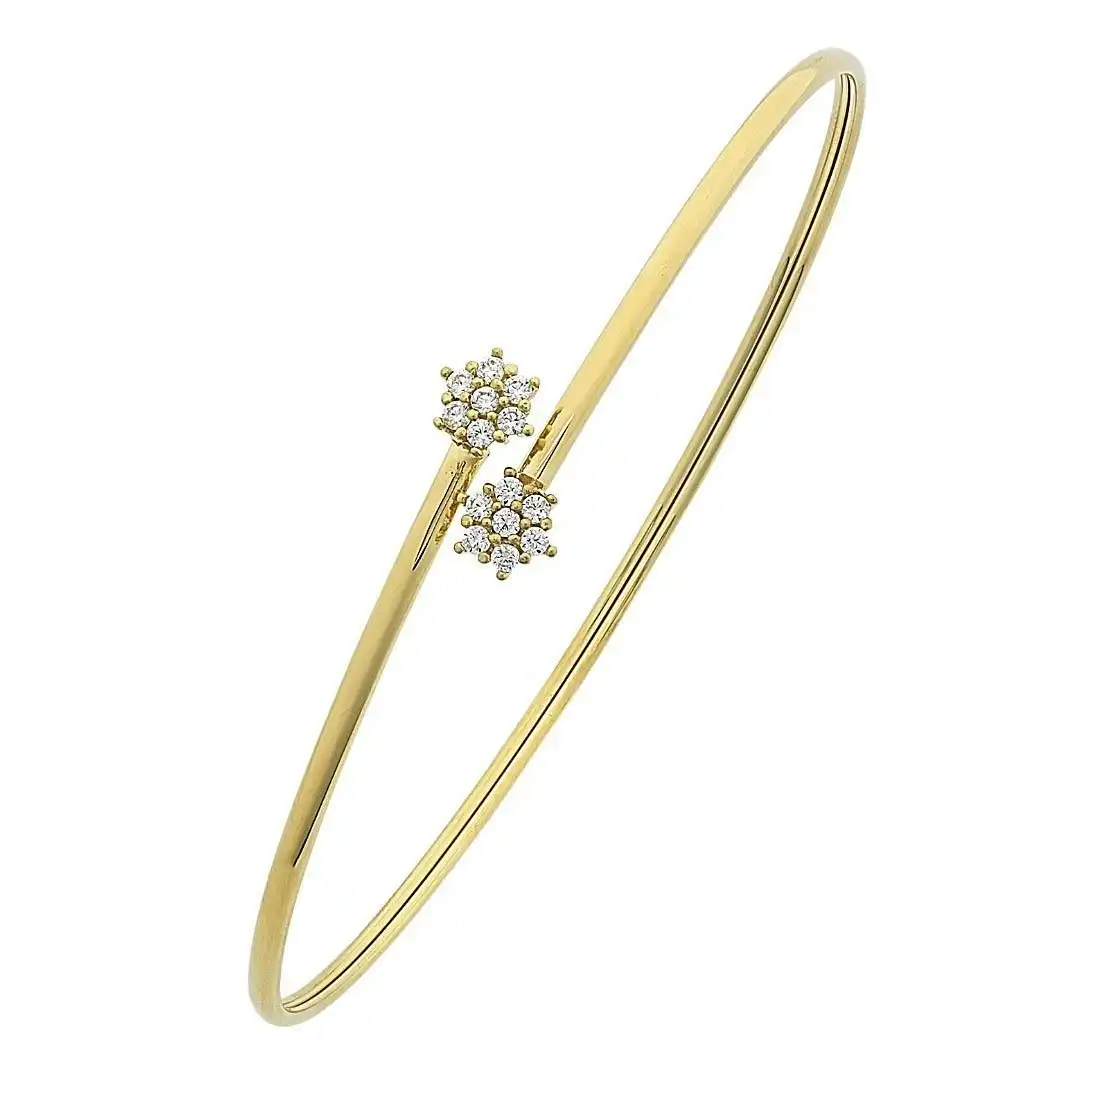 9ct Yellow Gold Silver Infused Flower Cuff Bangle